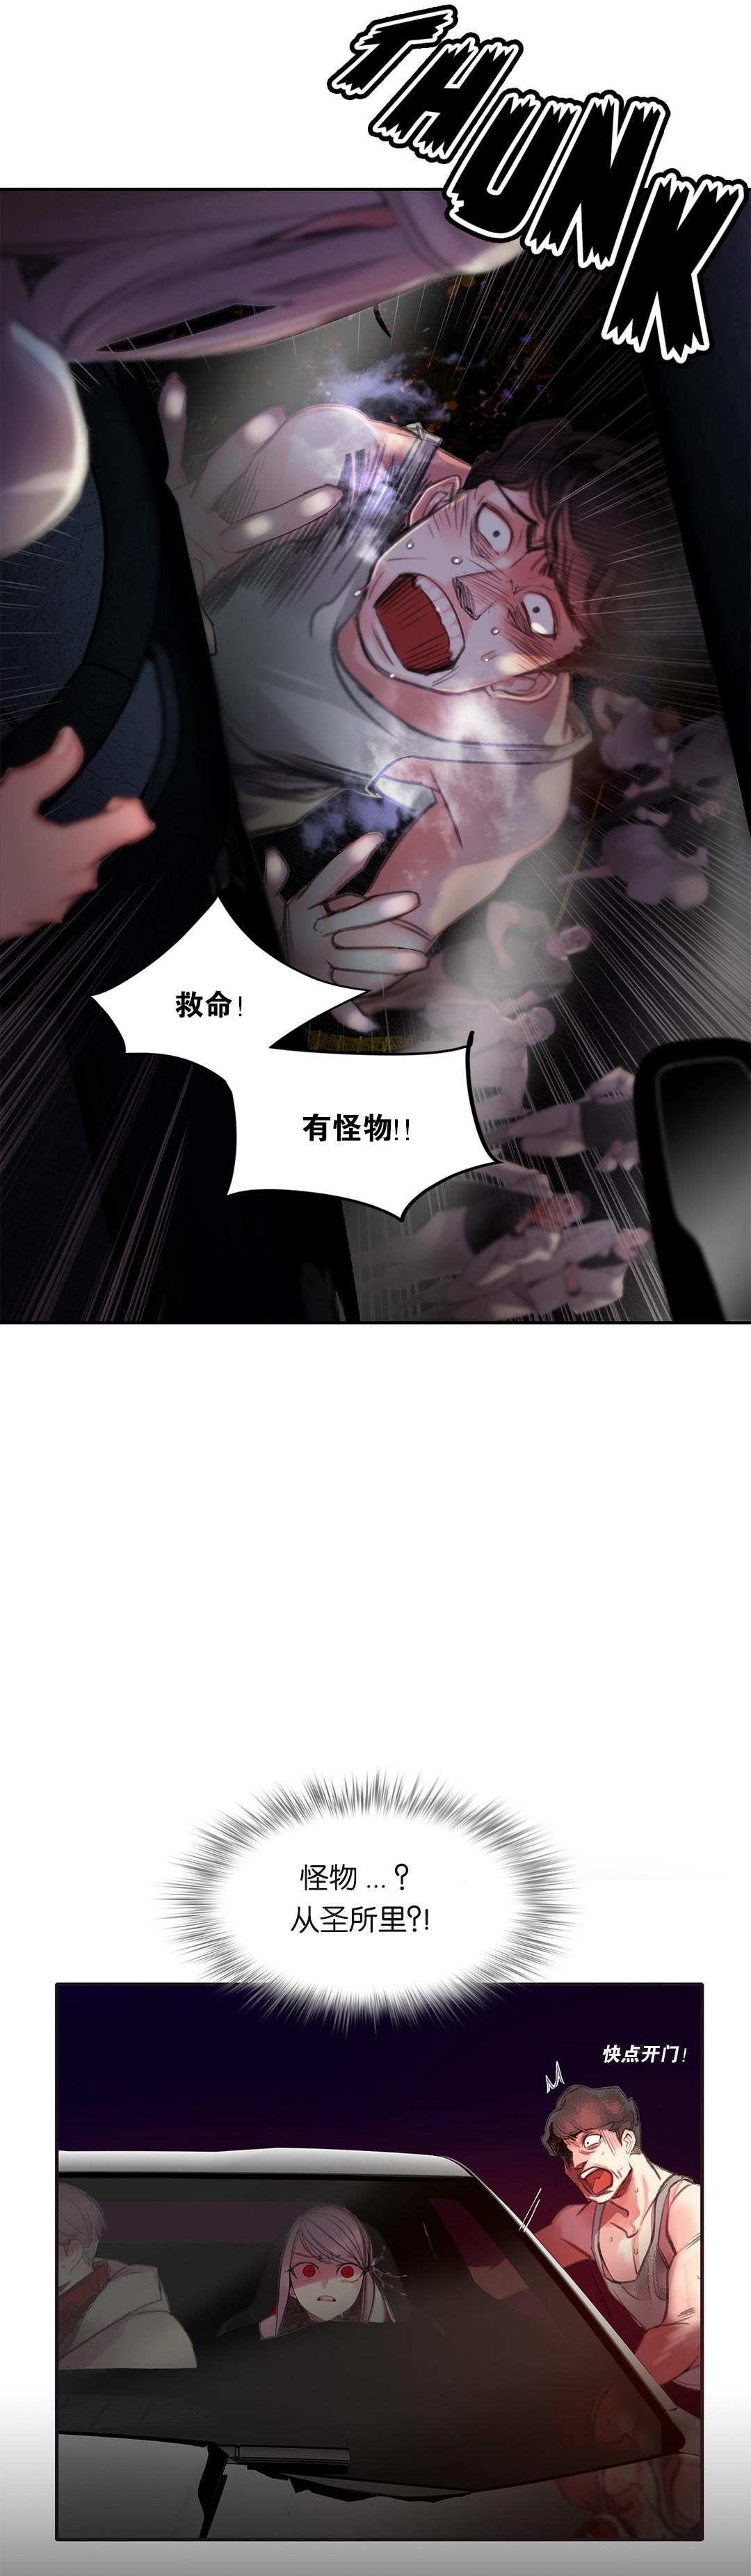 [Juder] Lilith`s Cord (第二季) Ch.61-68 [Chinese] [aaatwist个人汉化] [Ongoing] 14